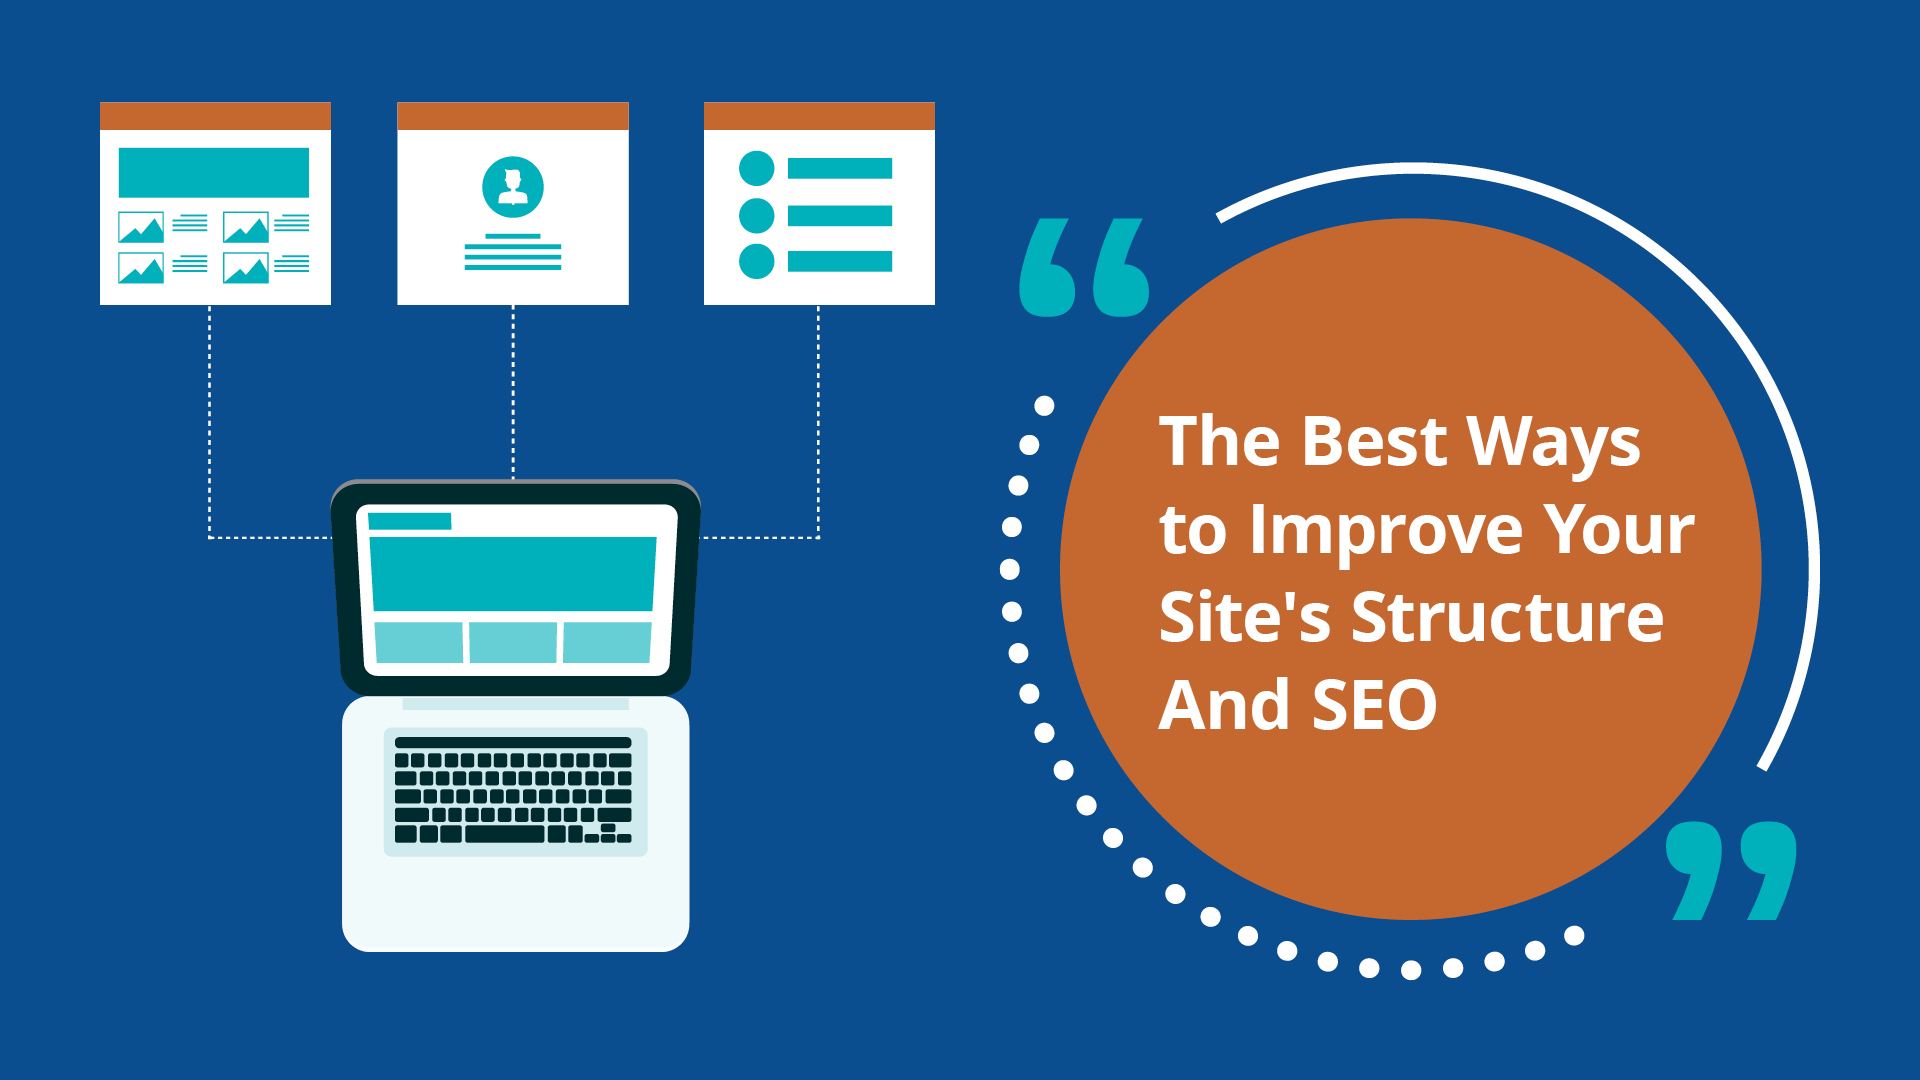 The Best Ways to Improve Your Site's Structure And SEO